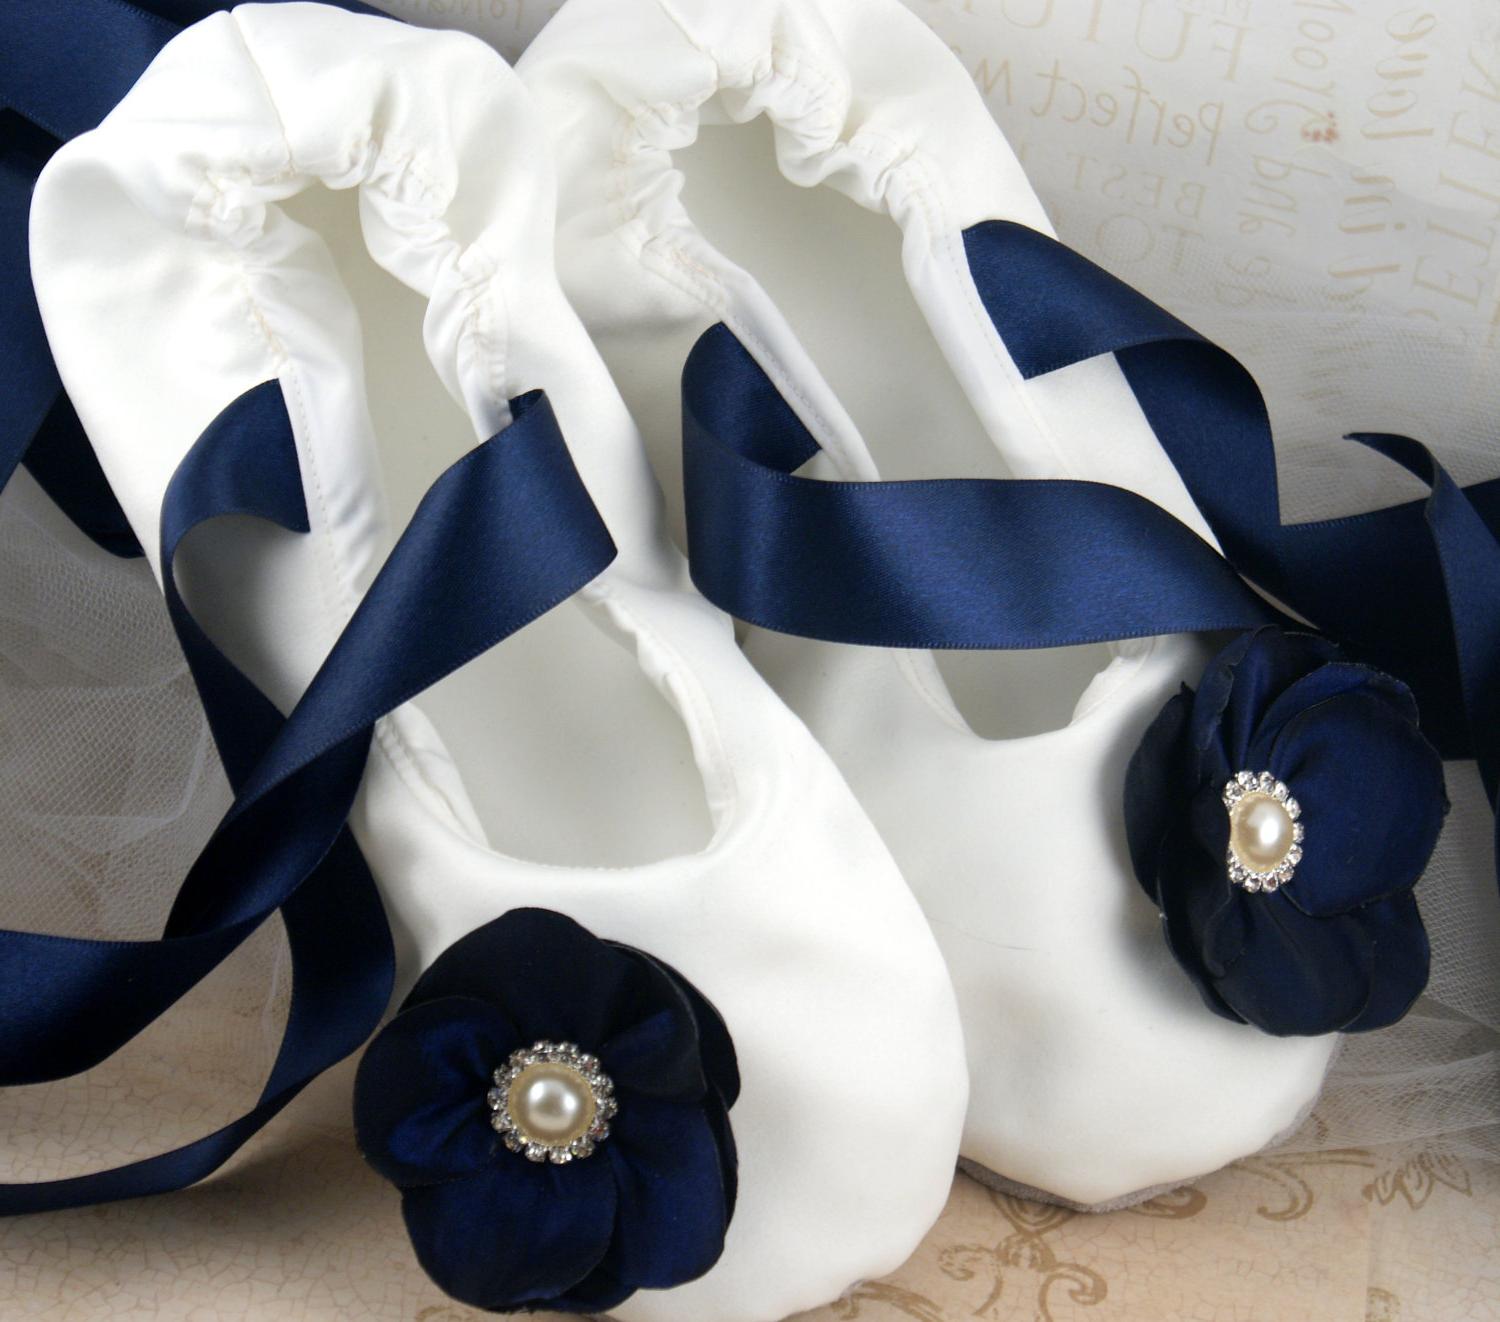 Bridal Flats - Bridal Ballerina Slippers in Ivory and Navy Blue Satin